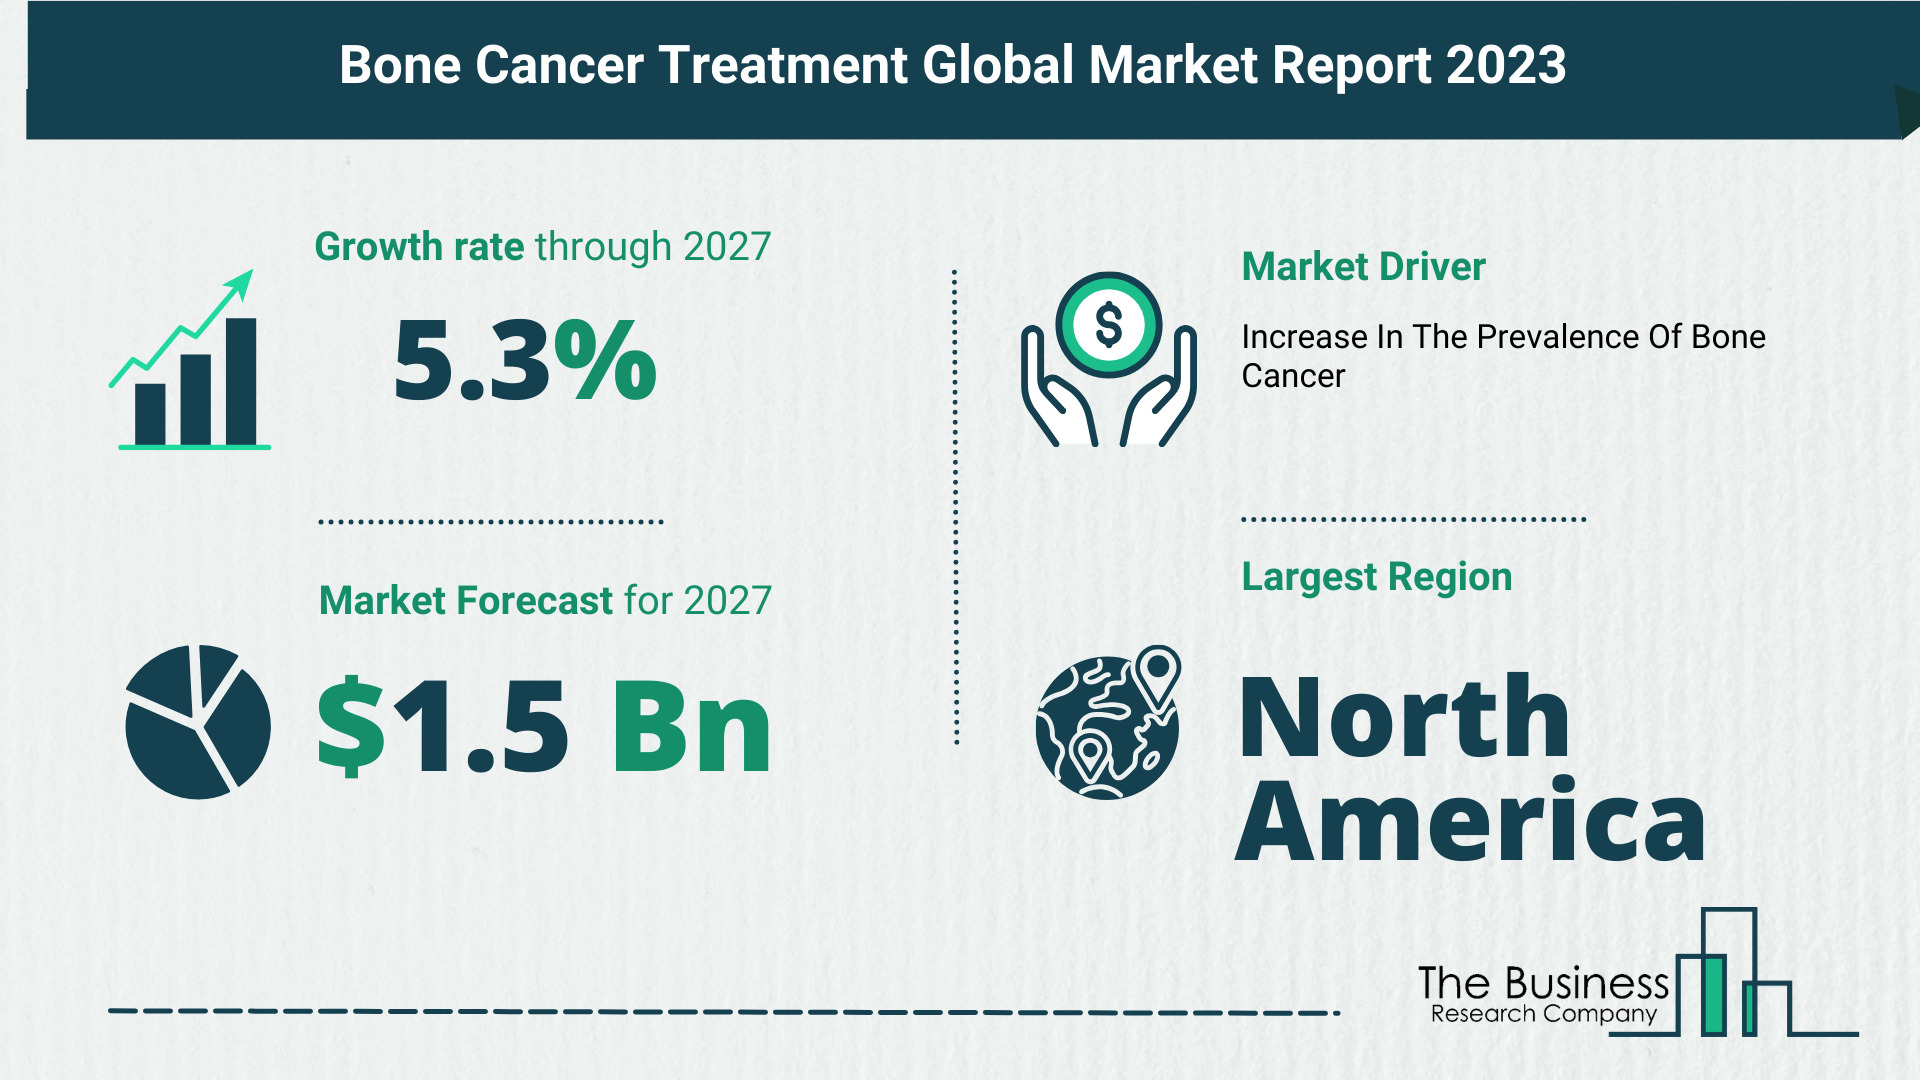 What Is The Forecast Growth Rate For The Bone Cancer Treatment Market?